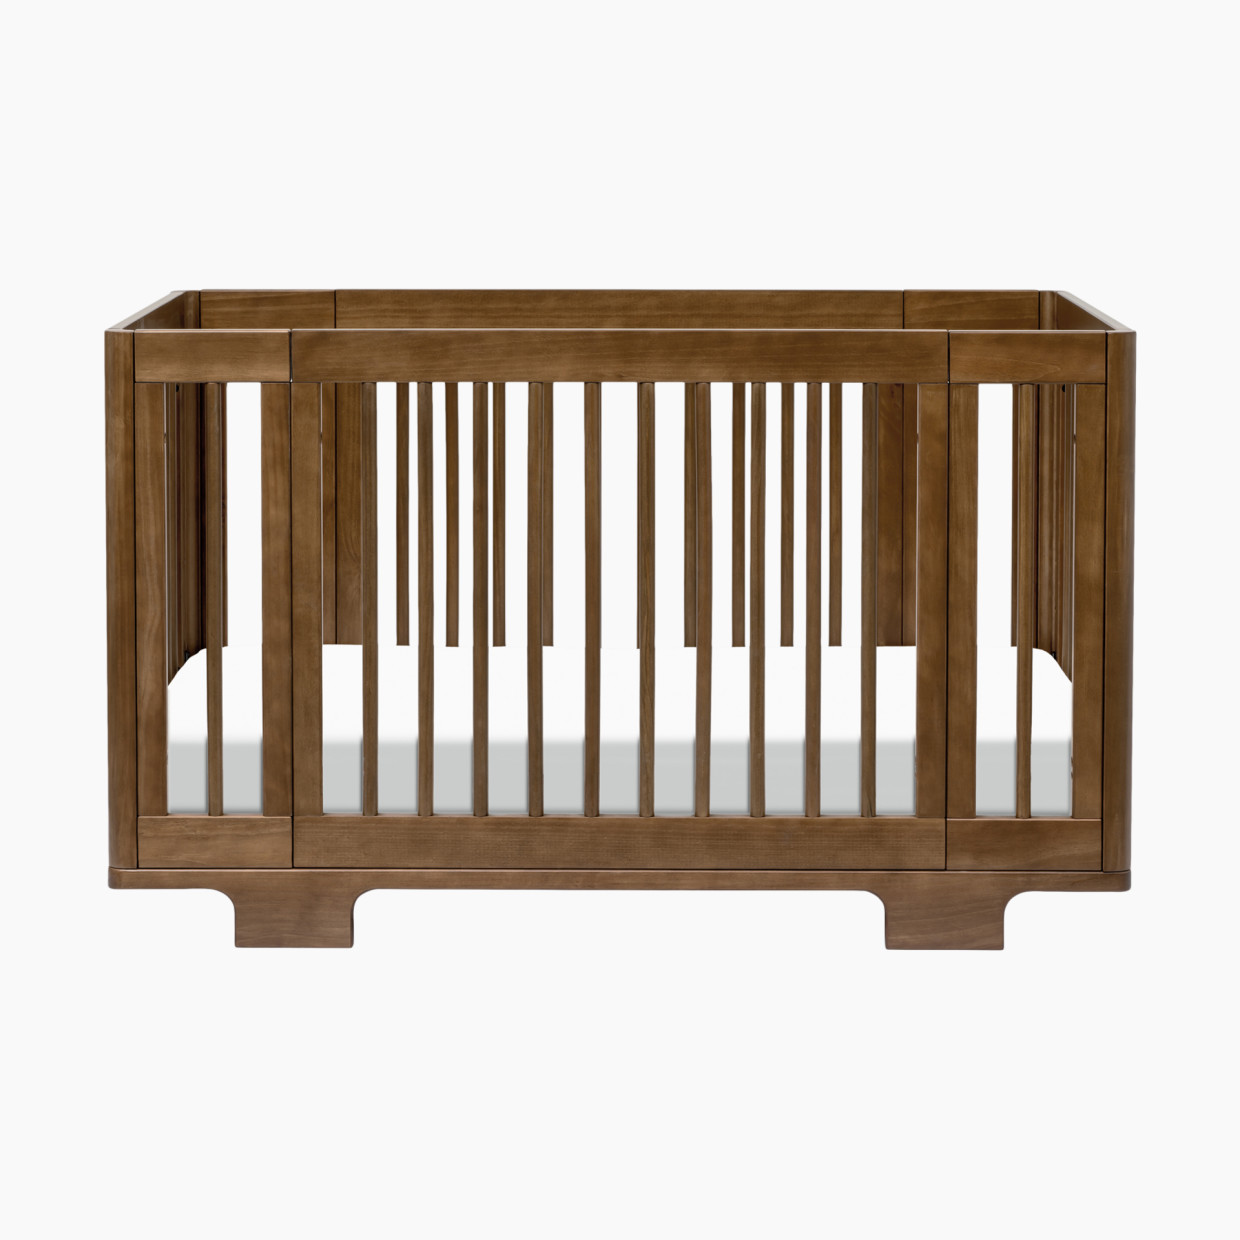 babyletto Yuzu 8-in-1 Convertible Crib with All-Stages Conversion Kits - Natural Walnut.